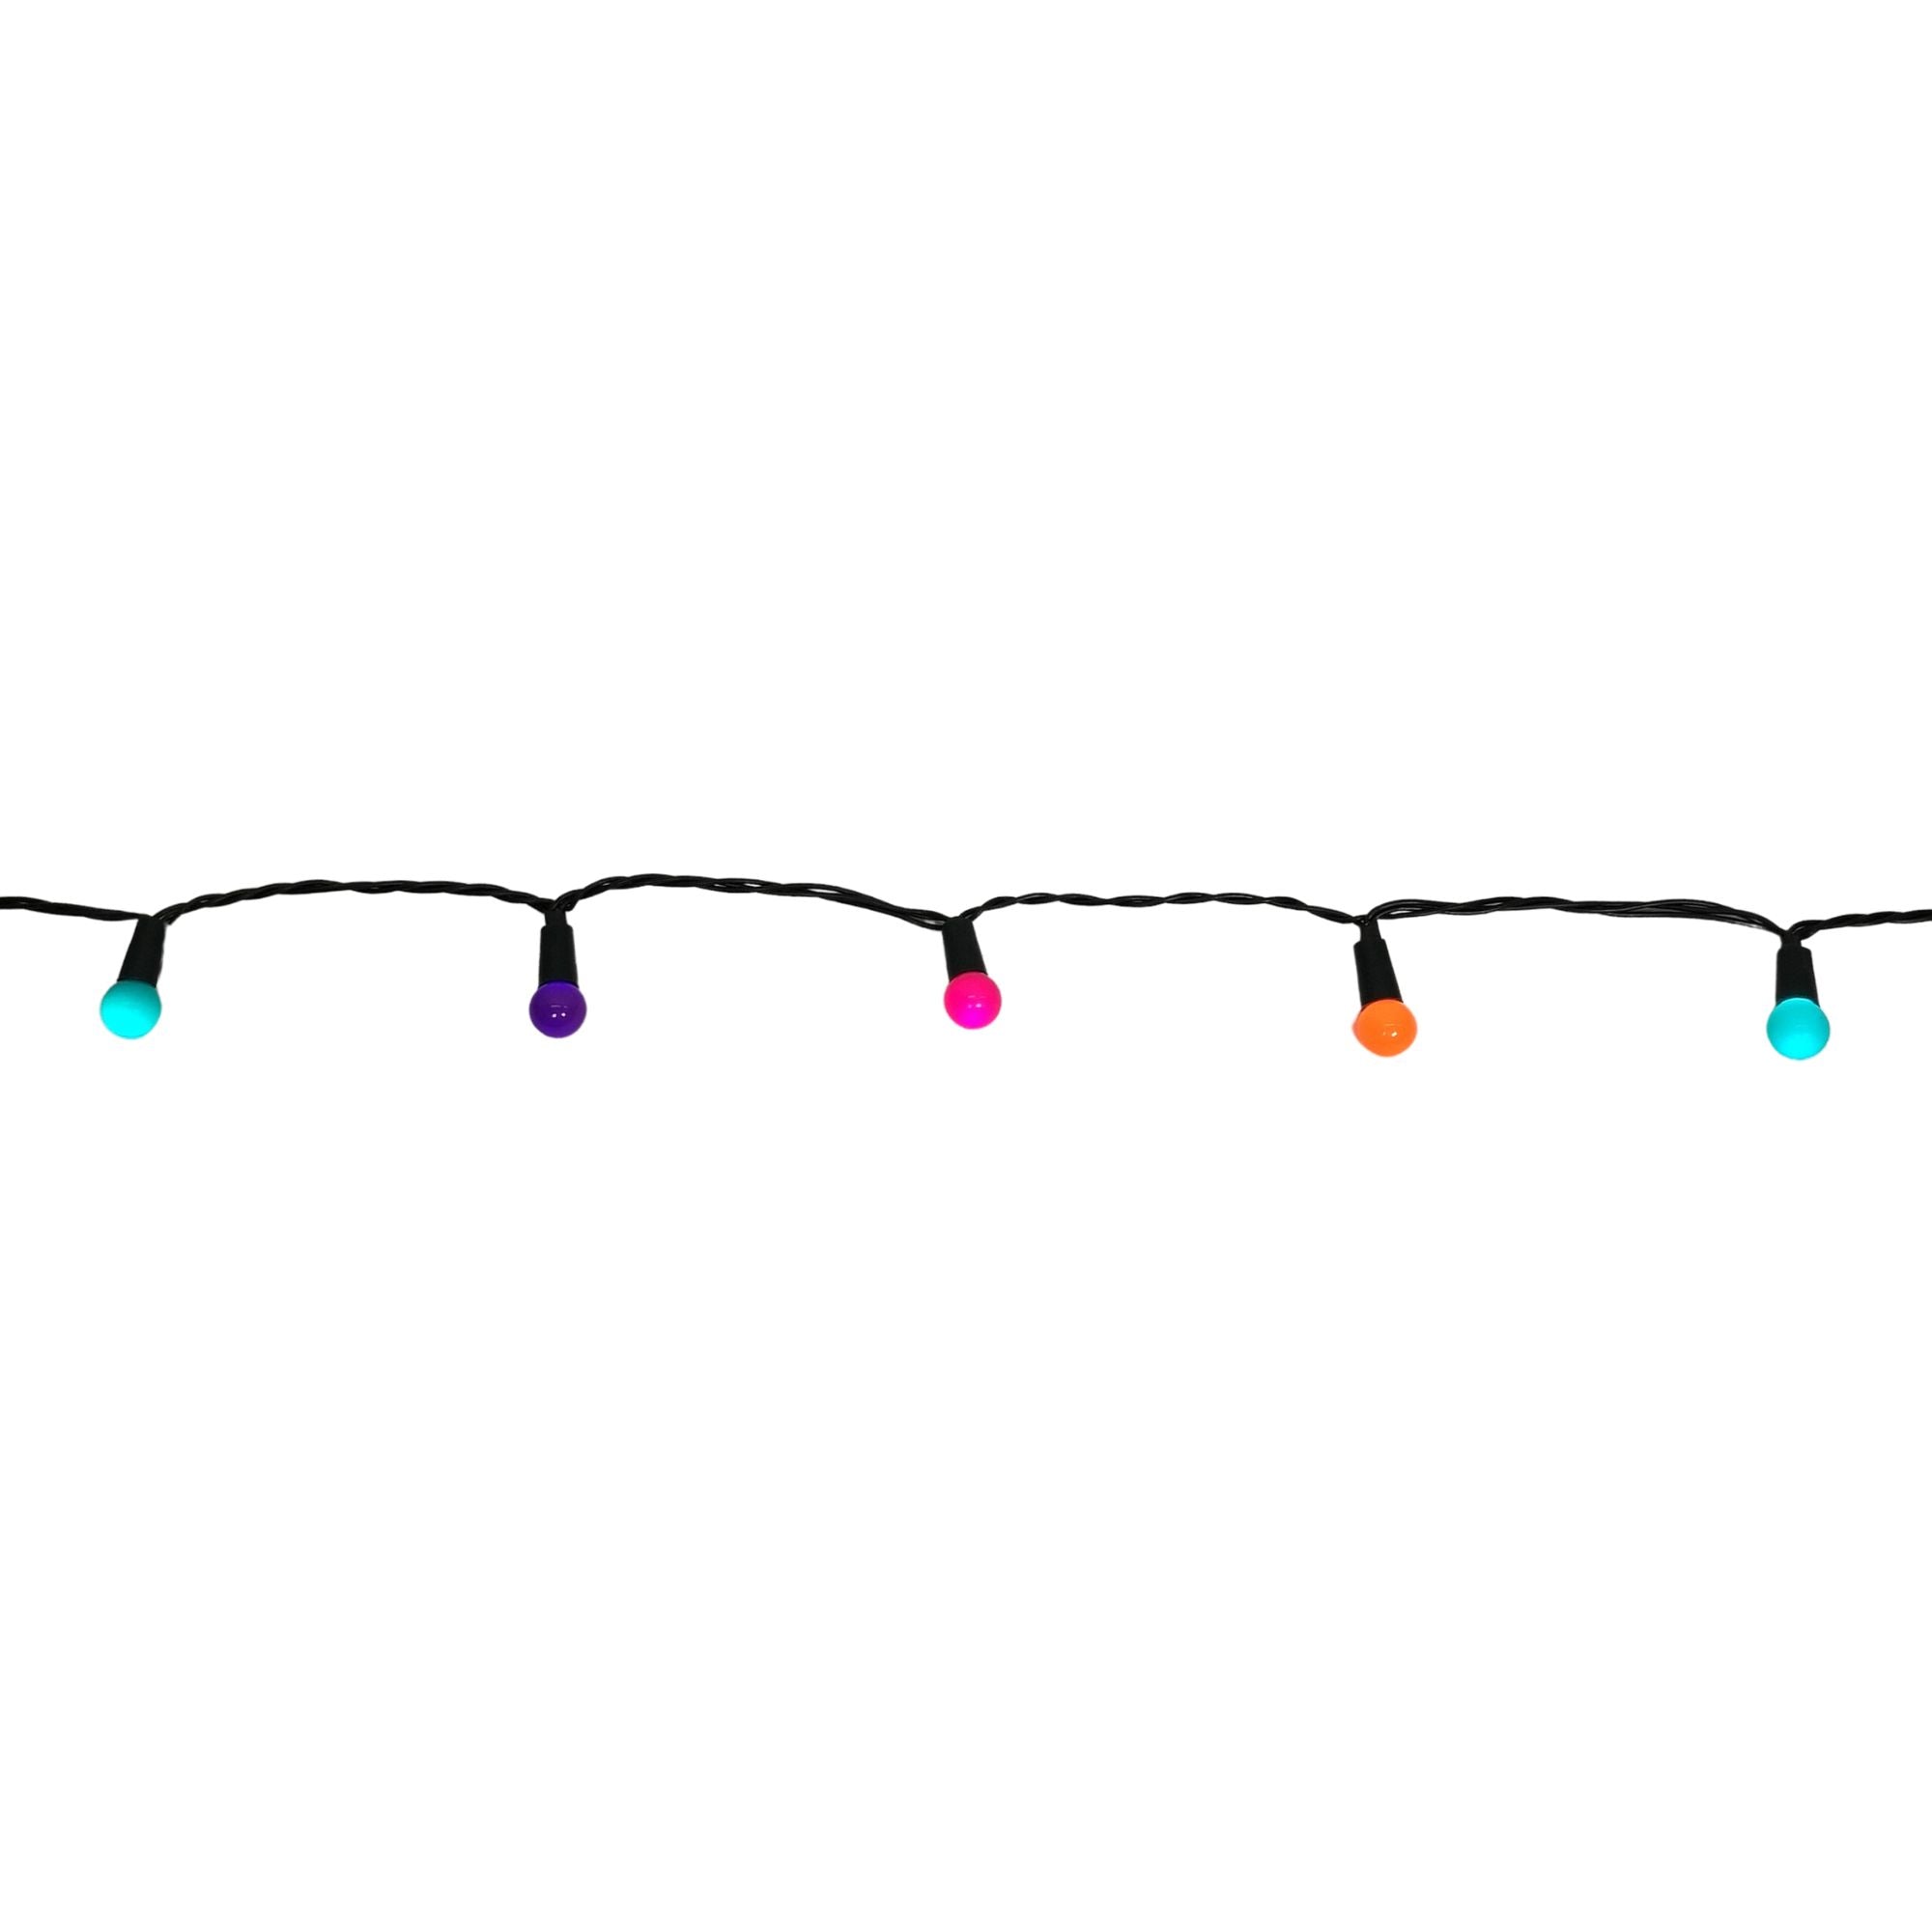 10m 100 LED Pearl Berry Rainbow String Lights Garden Christmas Lights with Timer